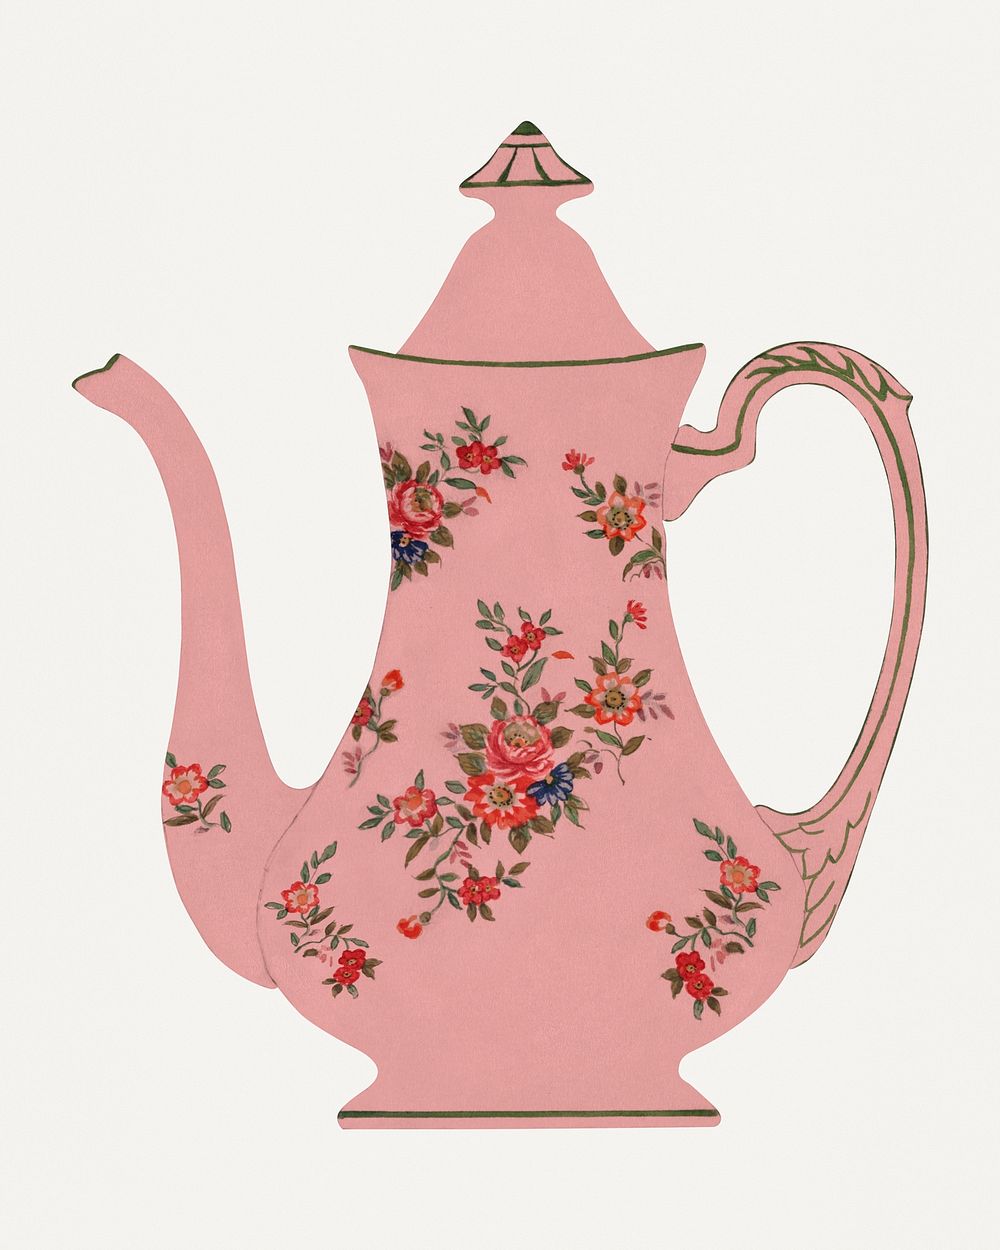 Vintage flowers and leaves teapot, remixed from Noritake factory china porcelain tableware design